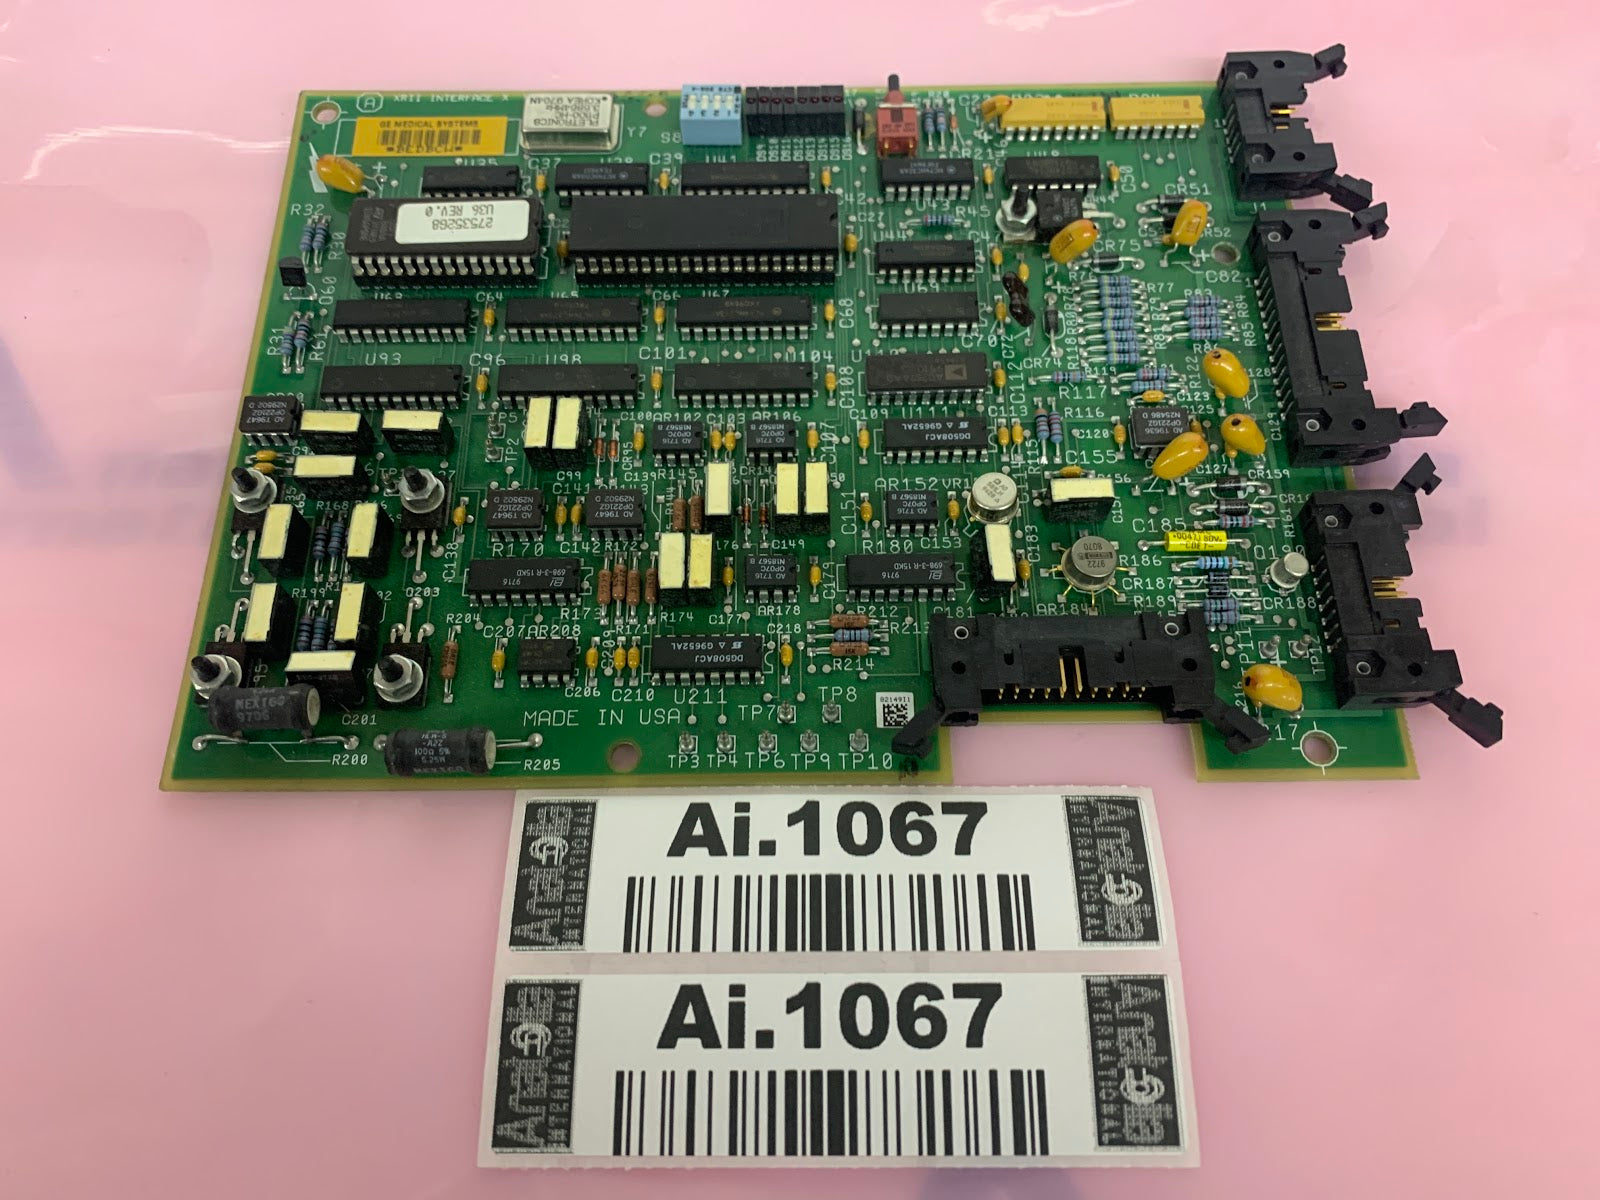 XRII INTERFACE X PCB For GE Cath/Angio Lab P/N: 46-264768 G5-A. Pulled from functioning Equipment, contact for more info.